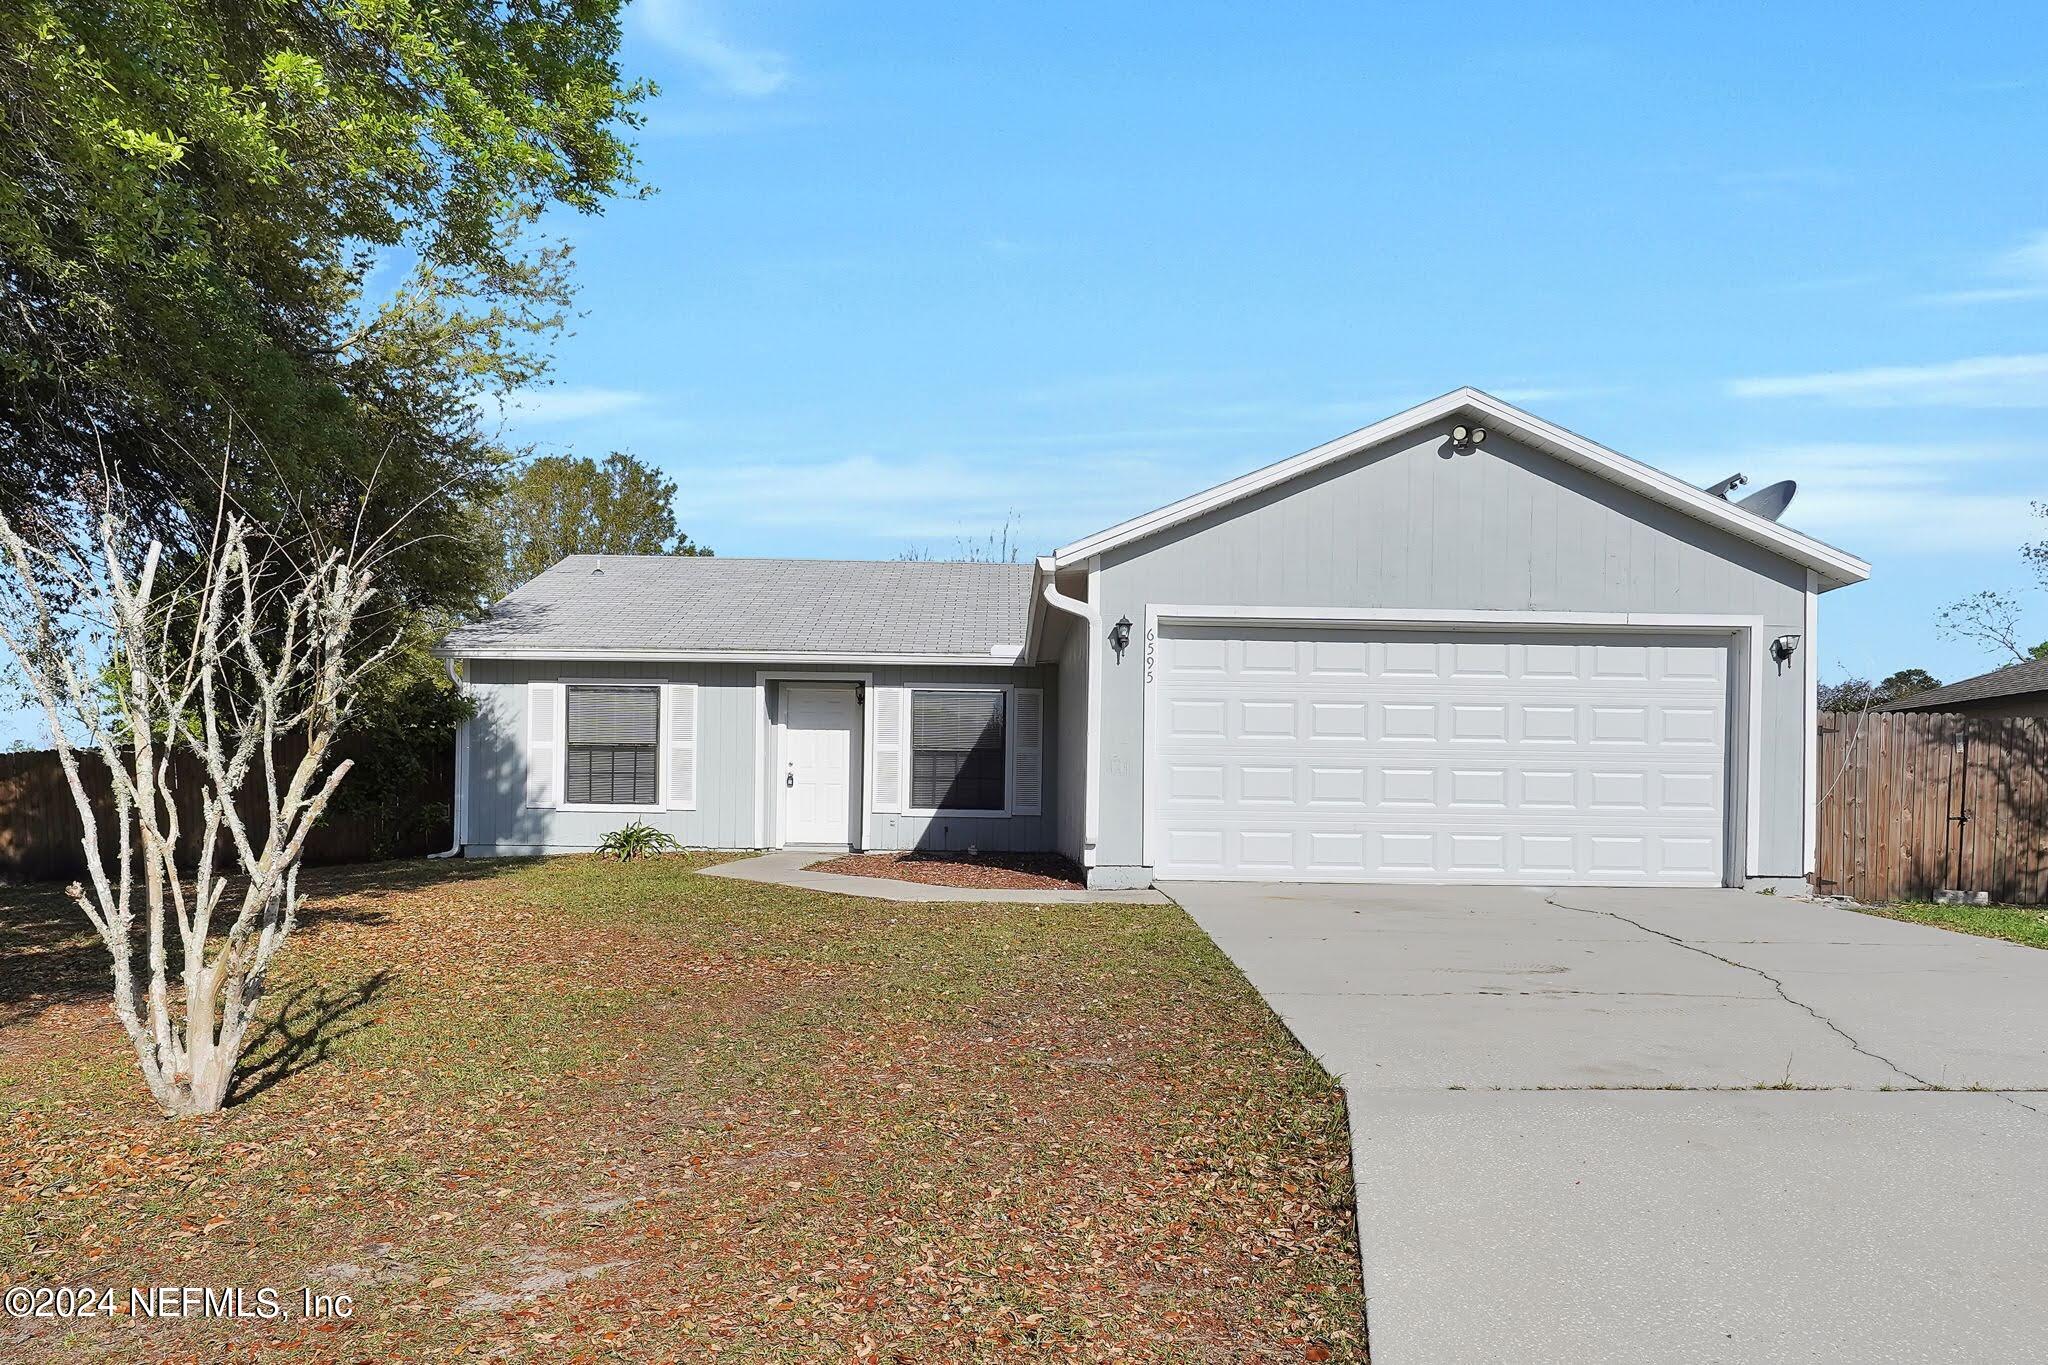 Jacksonville, FL home for sale located at 6595 BIG STONE Drive, Jacksonville, FL 32244